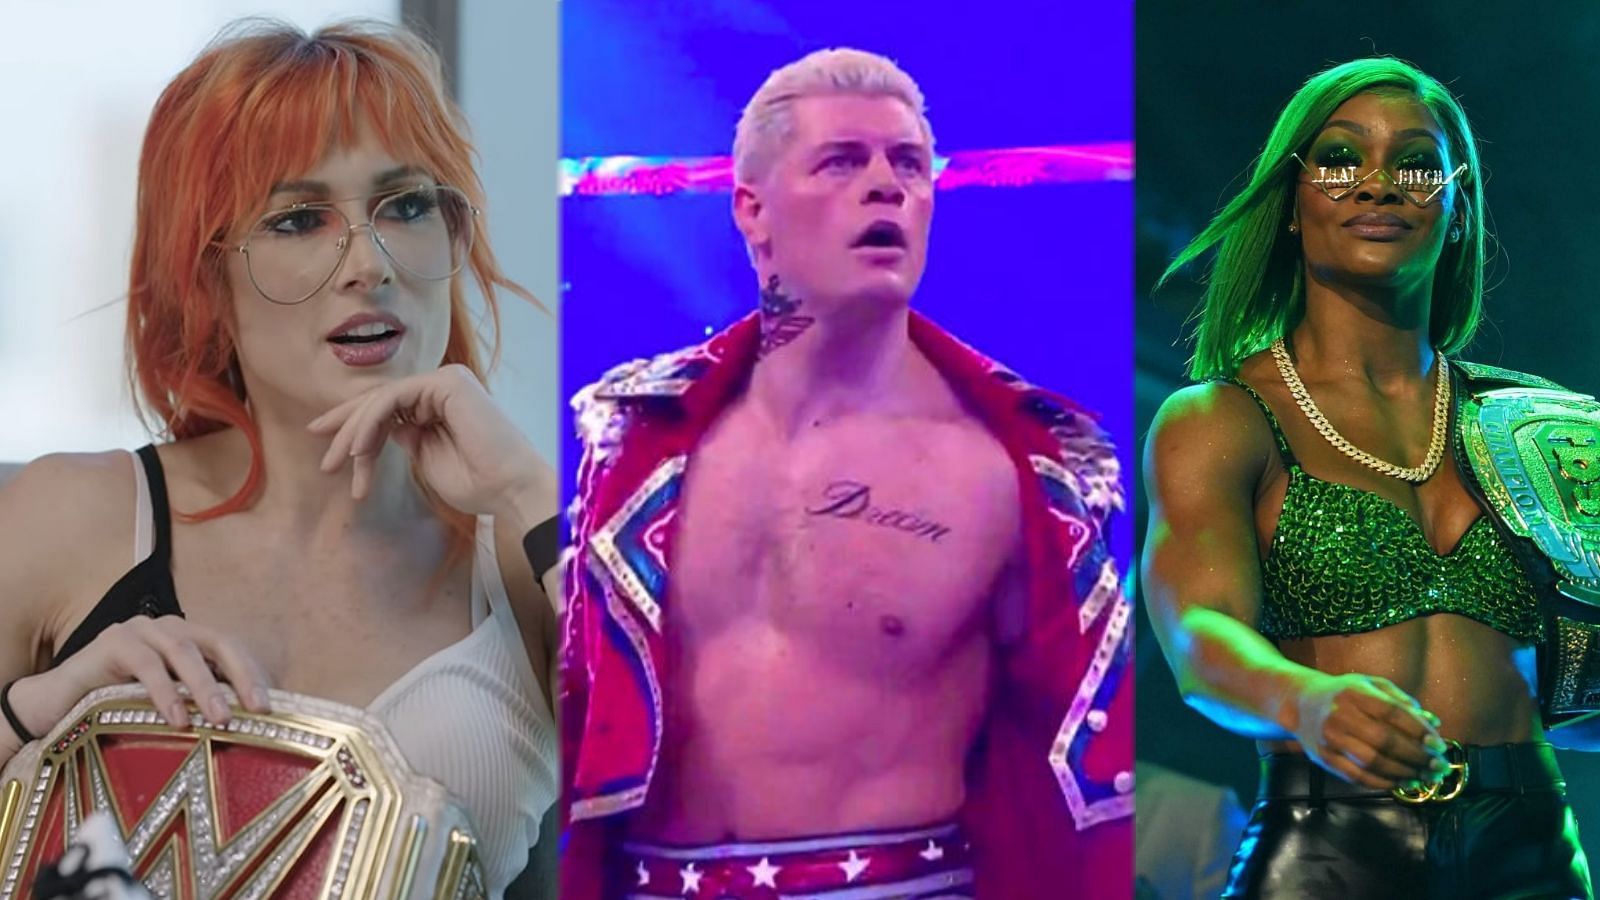 AEW has been catching the attention of WWE stars this week.